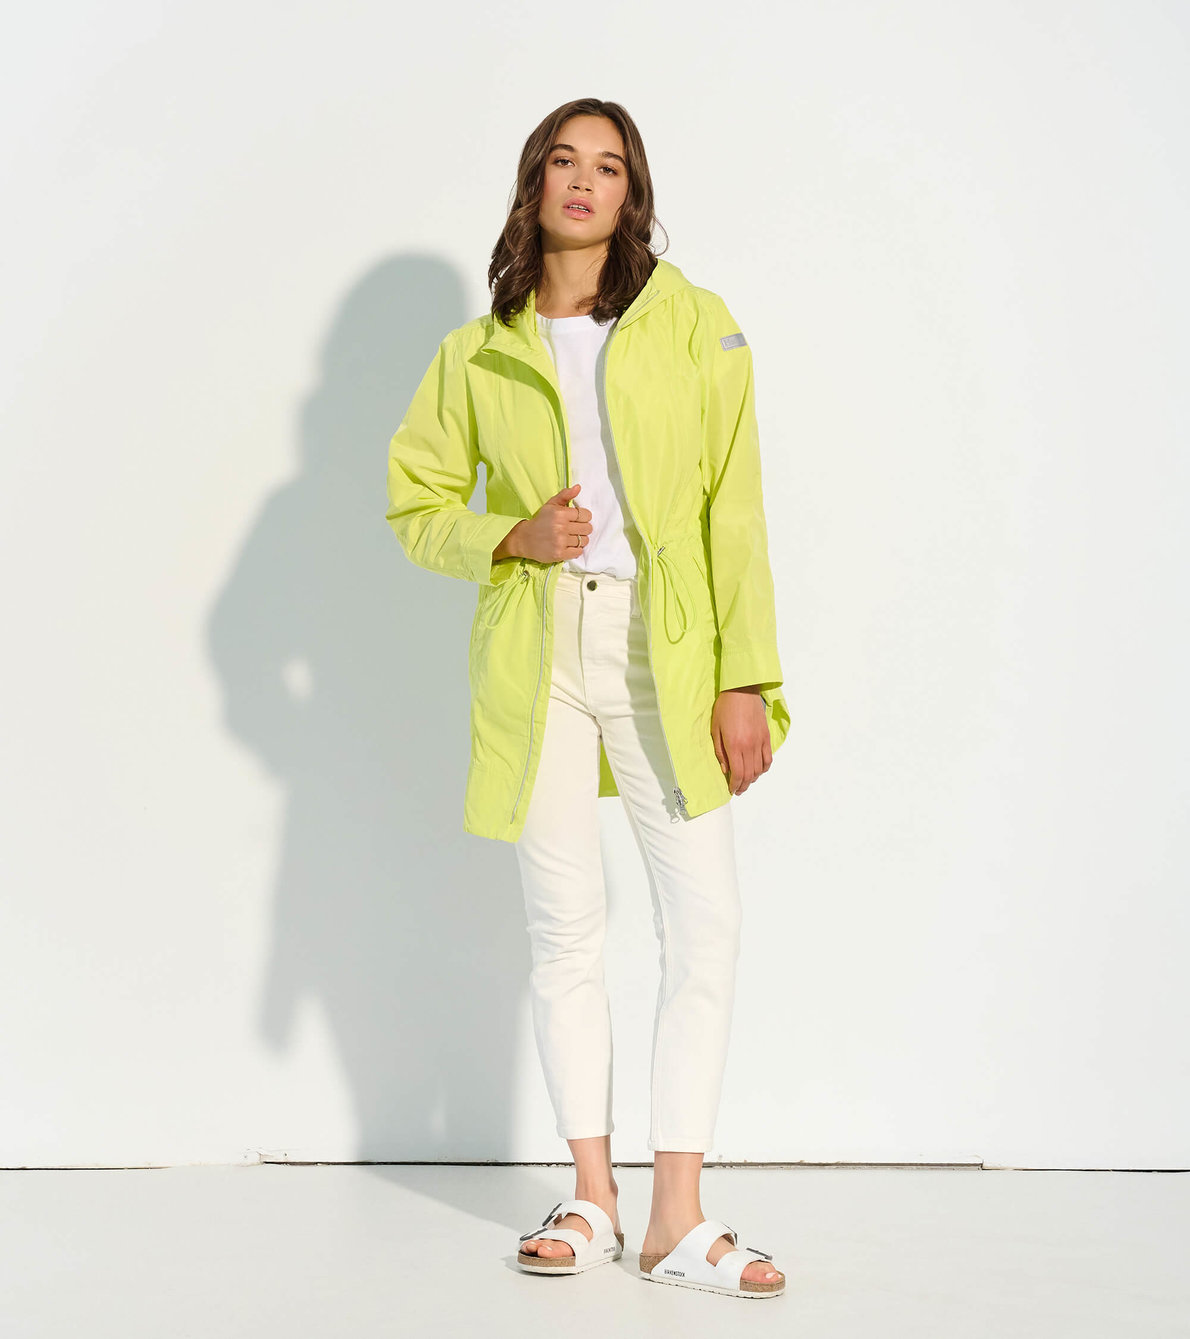 View larger image of Cinched Waist Rain Shell - Sunny Lime